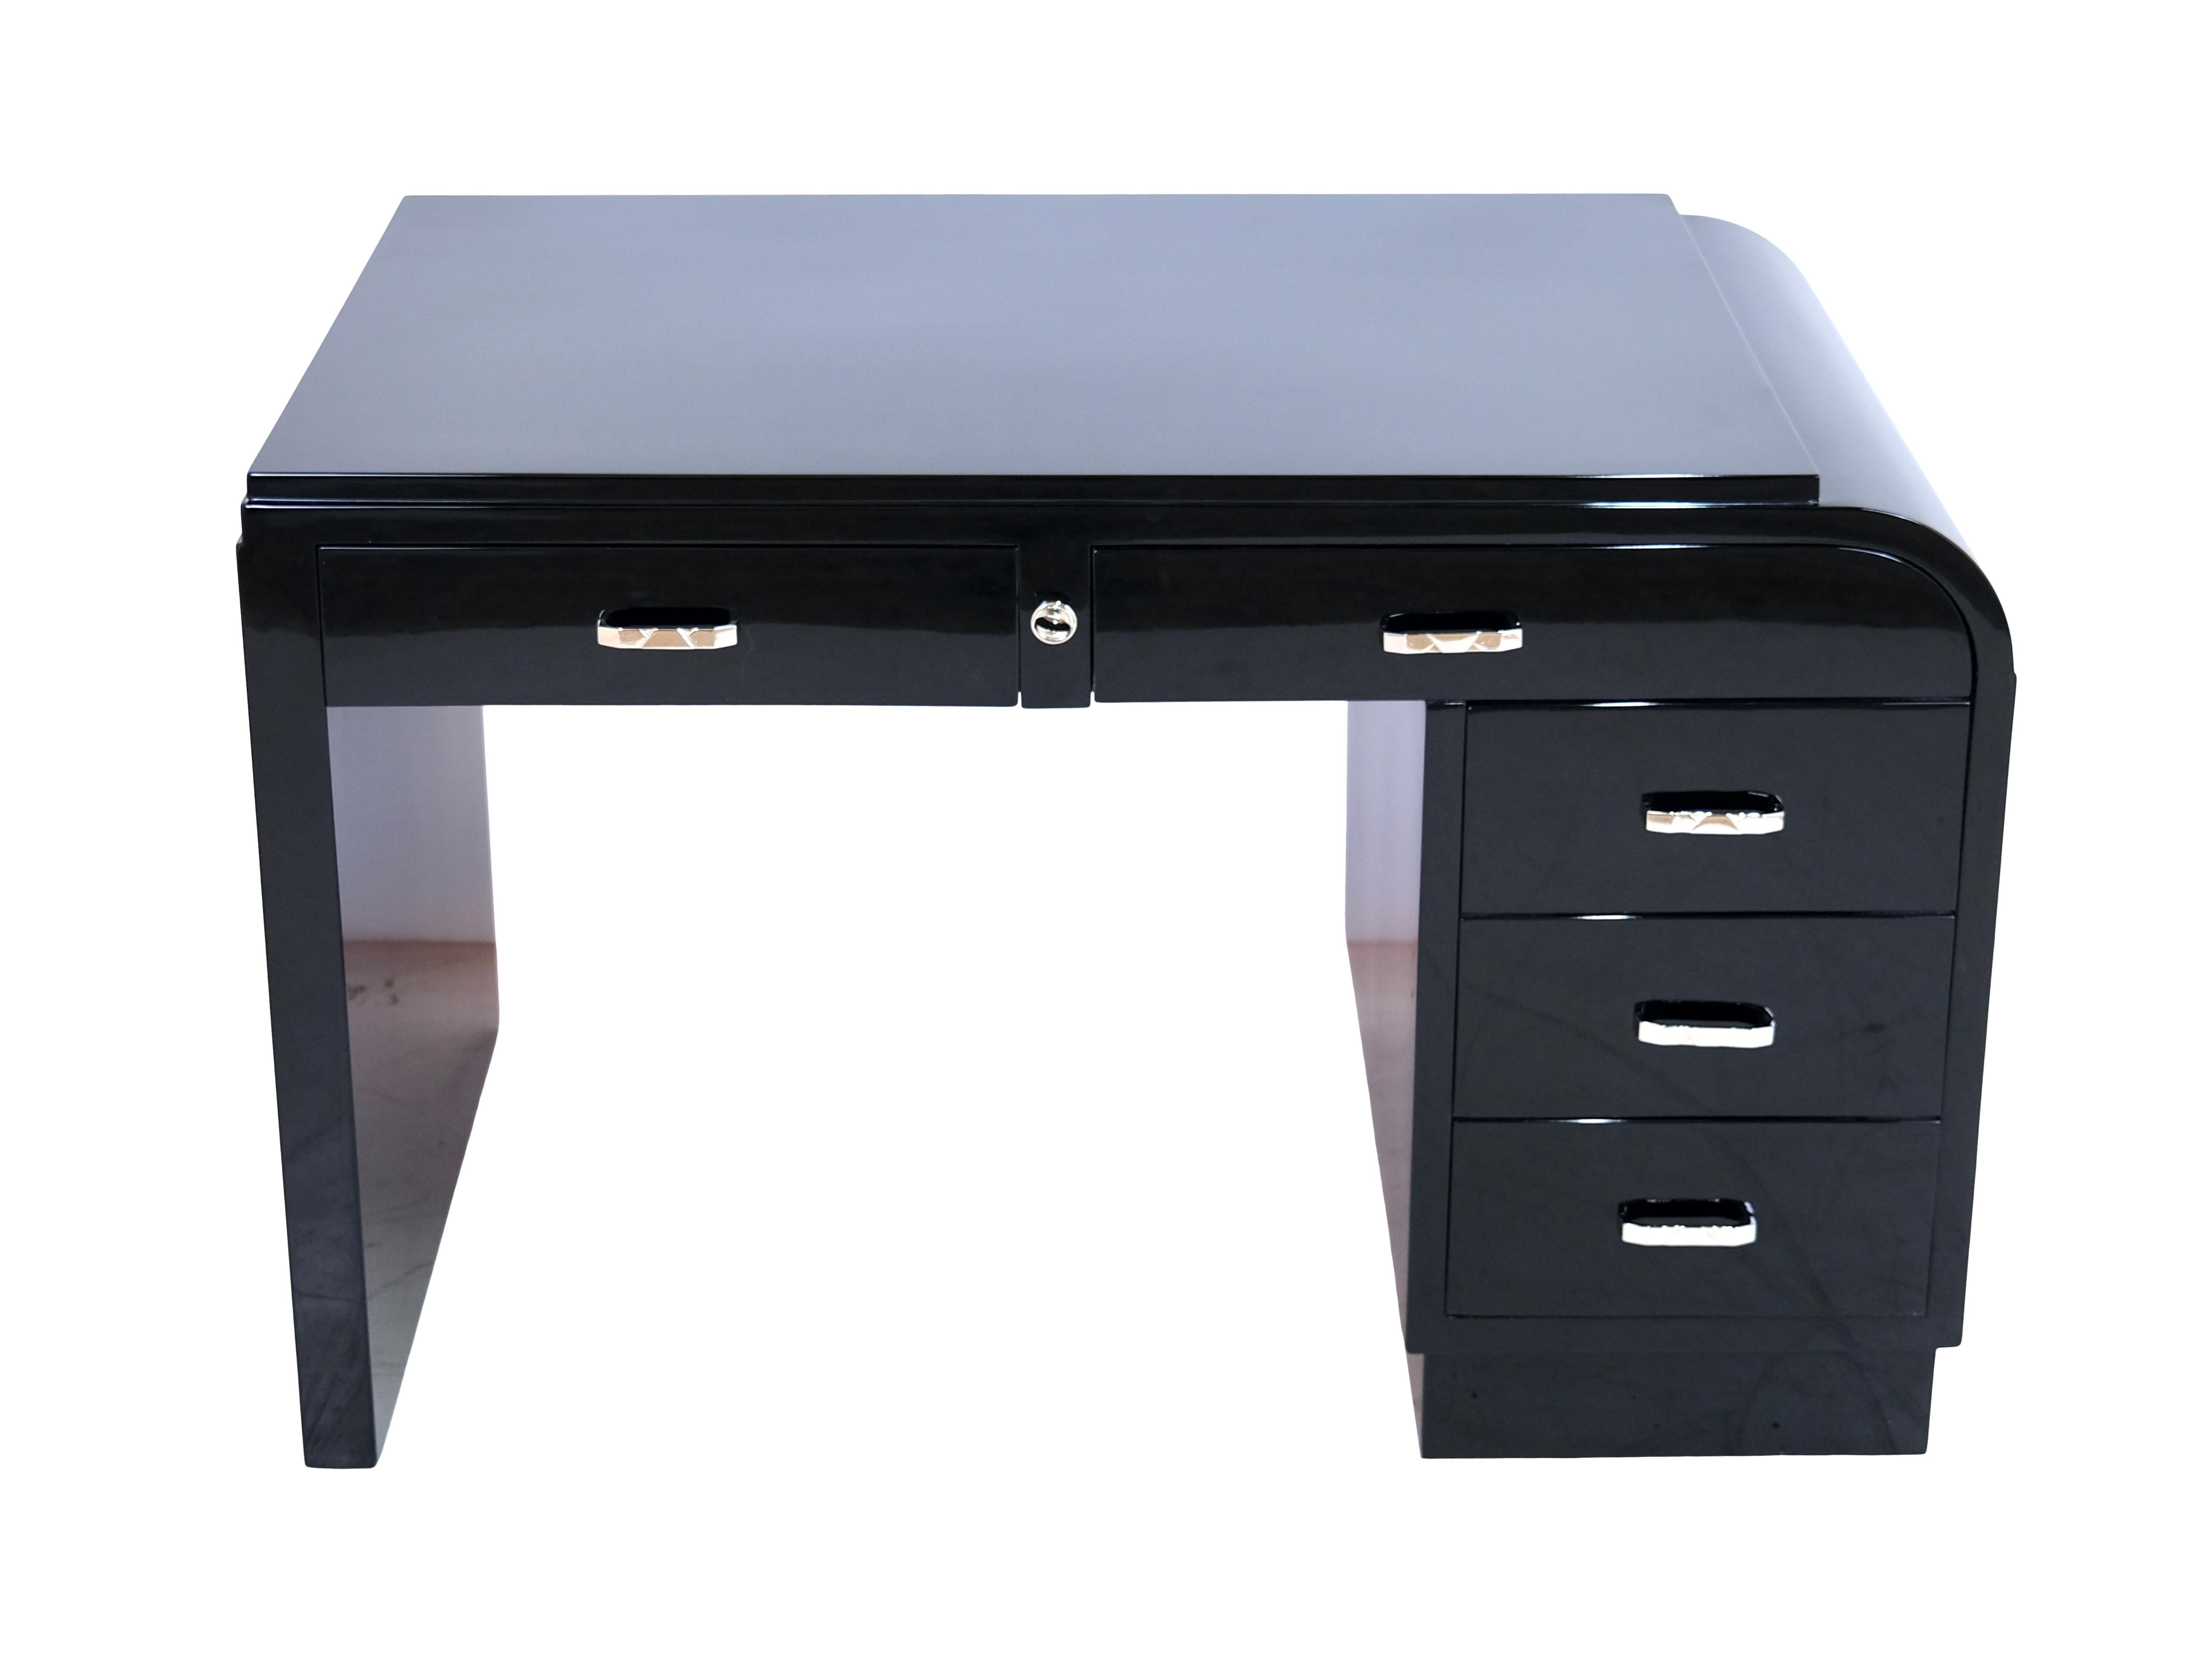 Desk
Piano lacquer, black high gloss
Special feature: the lock sits in the body, not in the drawers as usual.

Original Art Deco, France, 1930s.

Dimensions:
Width: 120 cm
Height: 77 cm
Depth: 66 cm